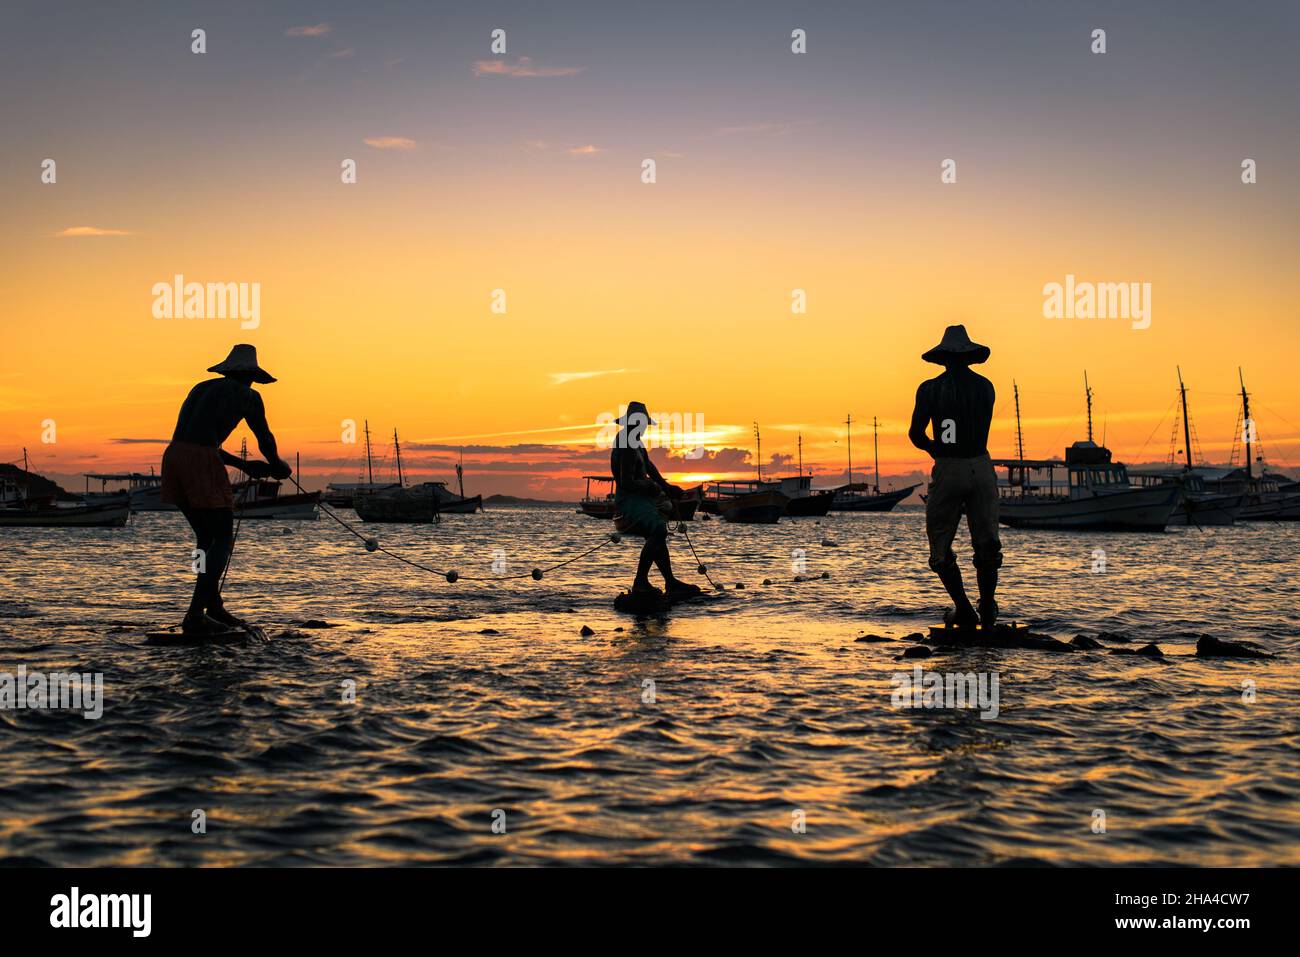 Buzios, Brazil - July 27, 2018: Sculpture of the three fishermen by artist Christina Motta in the city of Buzios is among the 26 most beautiful. Stock Photo